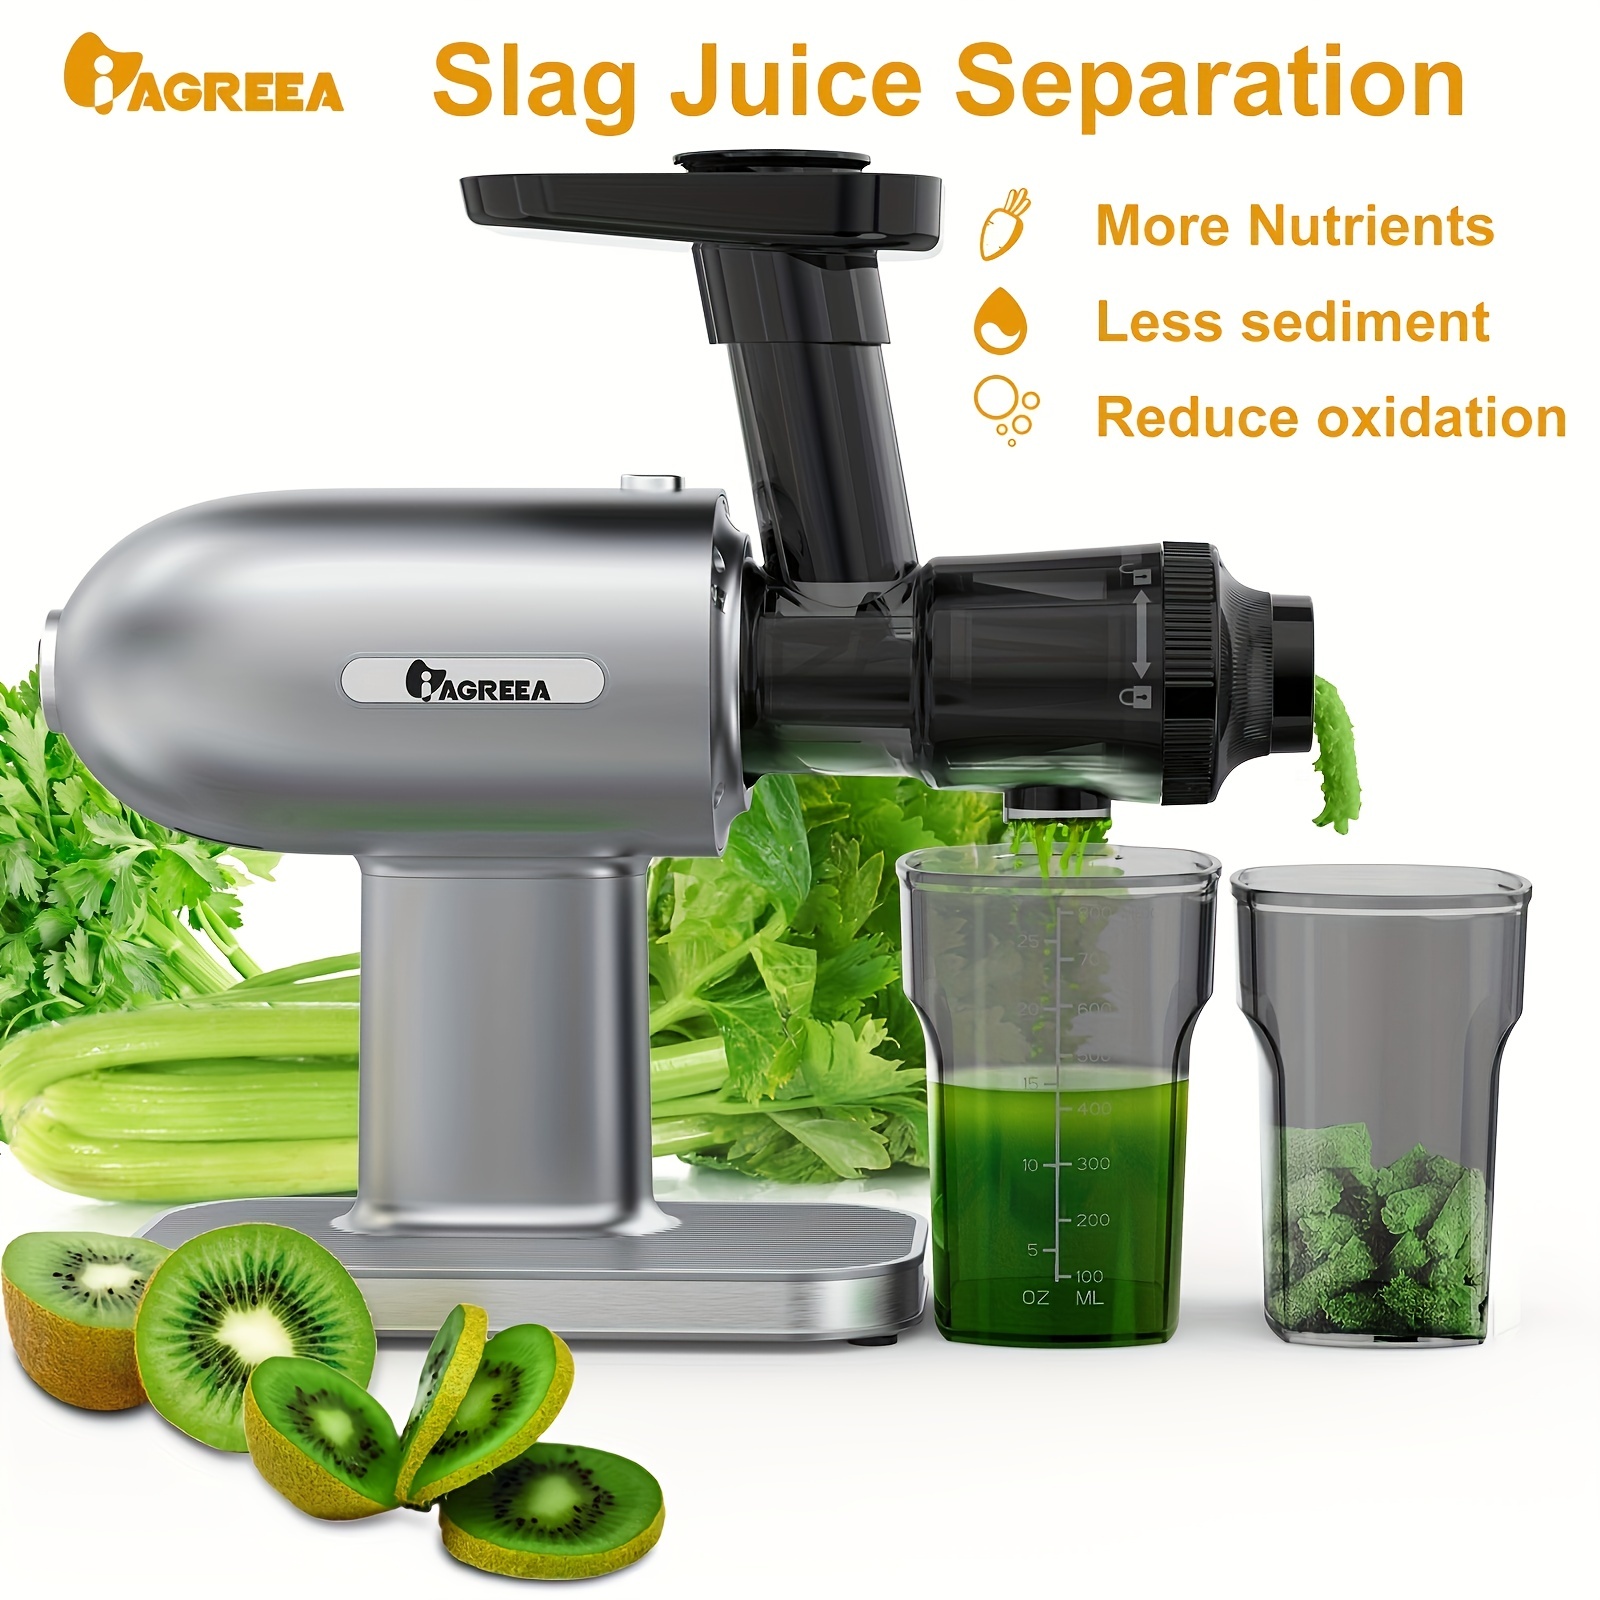 iagreea cold press juicer slow juicer machines for vegetable and fruit compact small space saving masticating juicer ultra power juicer maker with reverse function details 5